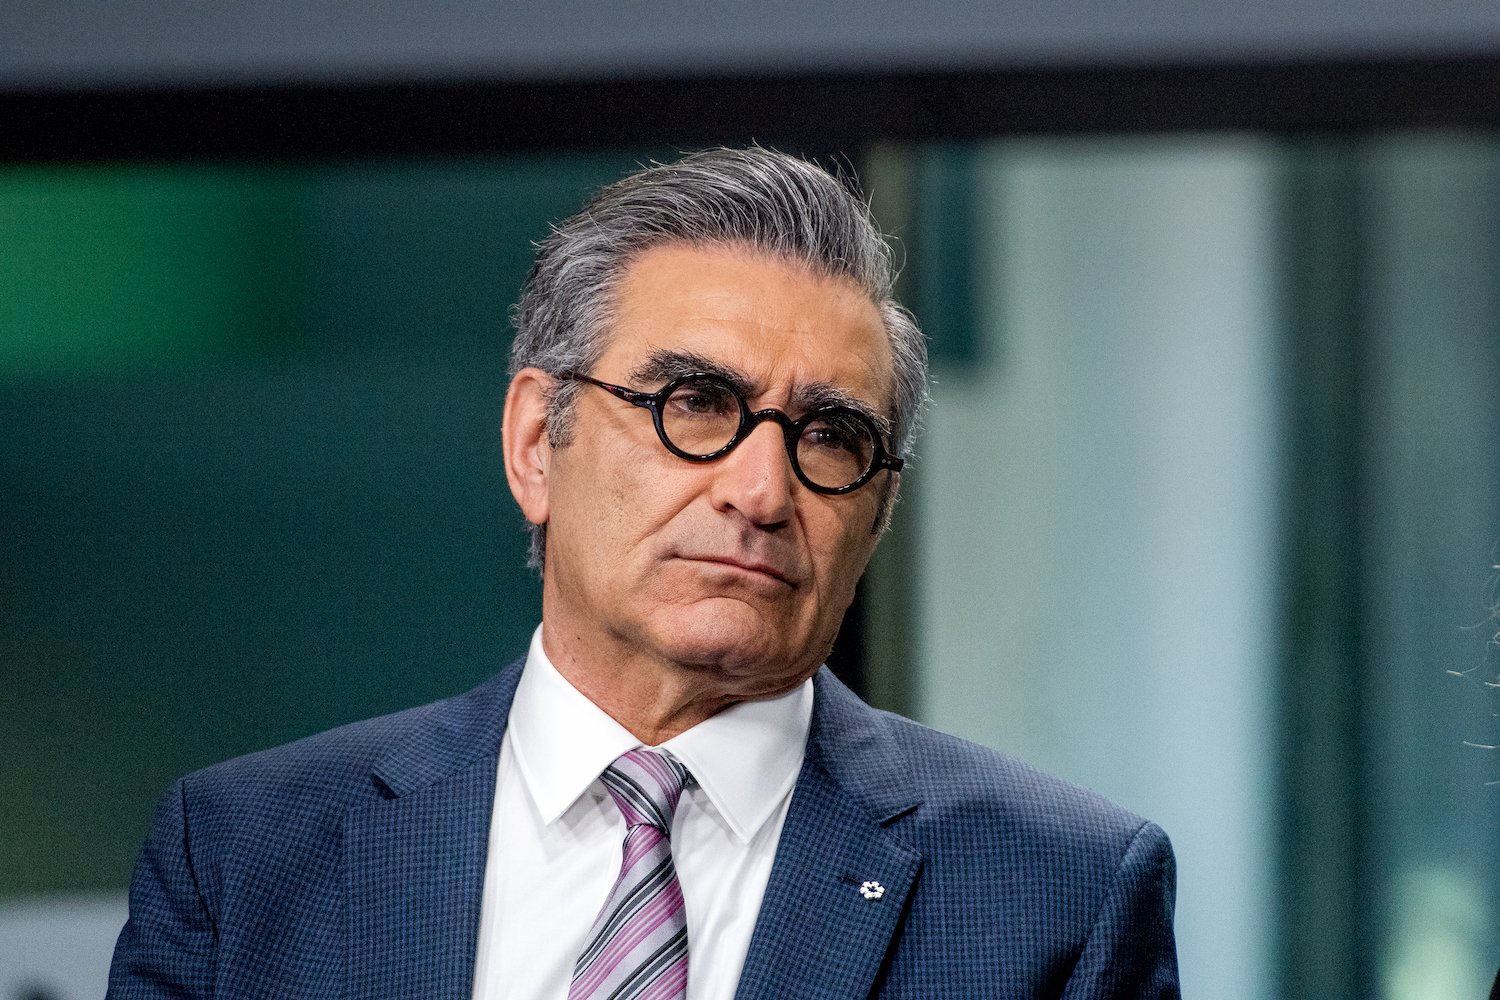 Schitt's Creek': Chris Elliot Made Eugene Levy Break Character and Laugh  During Scenes All the Time—'He Does It Intentionally'